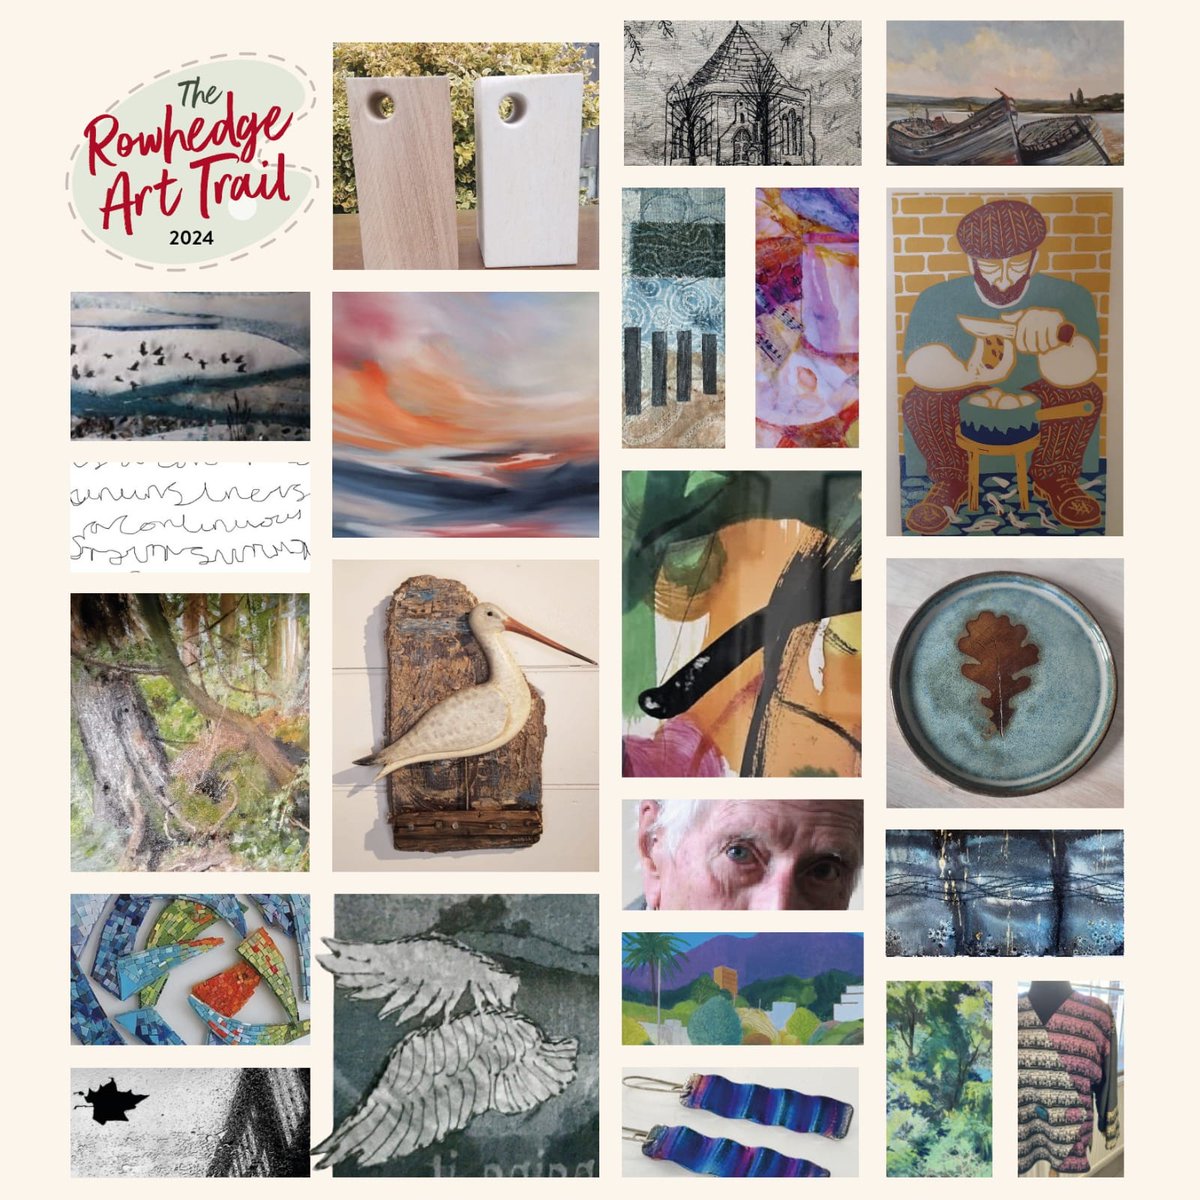 This weekend!

There will be over 20 artists exhibiting on 11 and 12 May 2024. Drop by and see what we have all been up to since last year's trail.

#CreativeColchester #ColchesterArtist #EssexArtist #EmergingArtist #AbbieCairns #ArtTrail #RowhedgeArtTrail